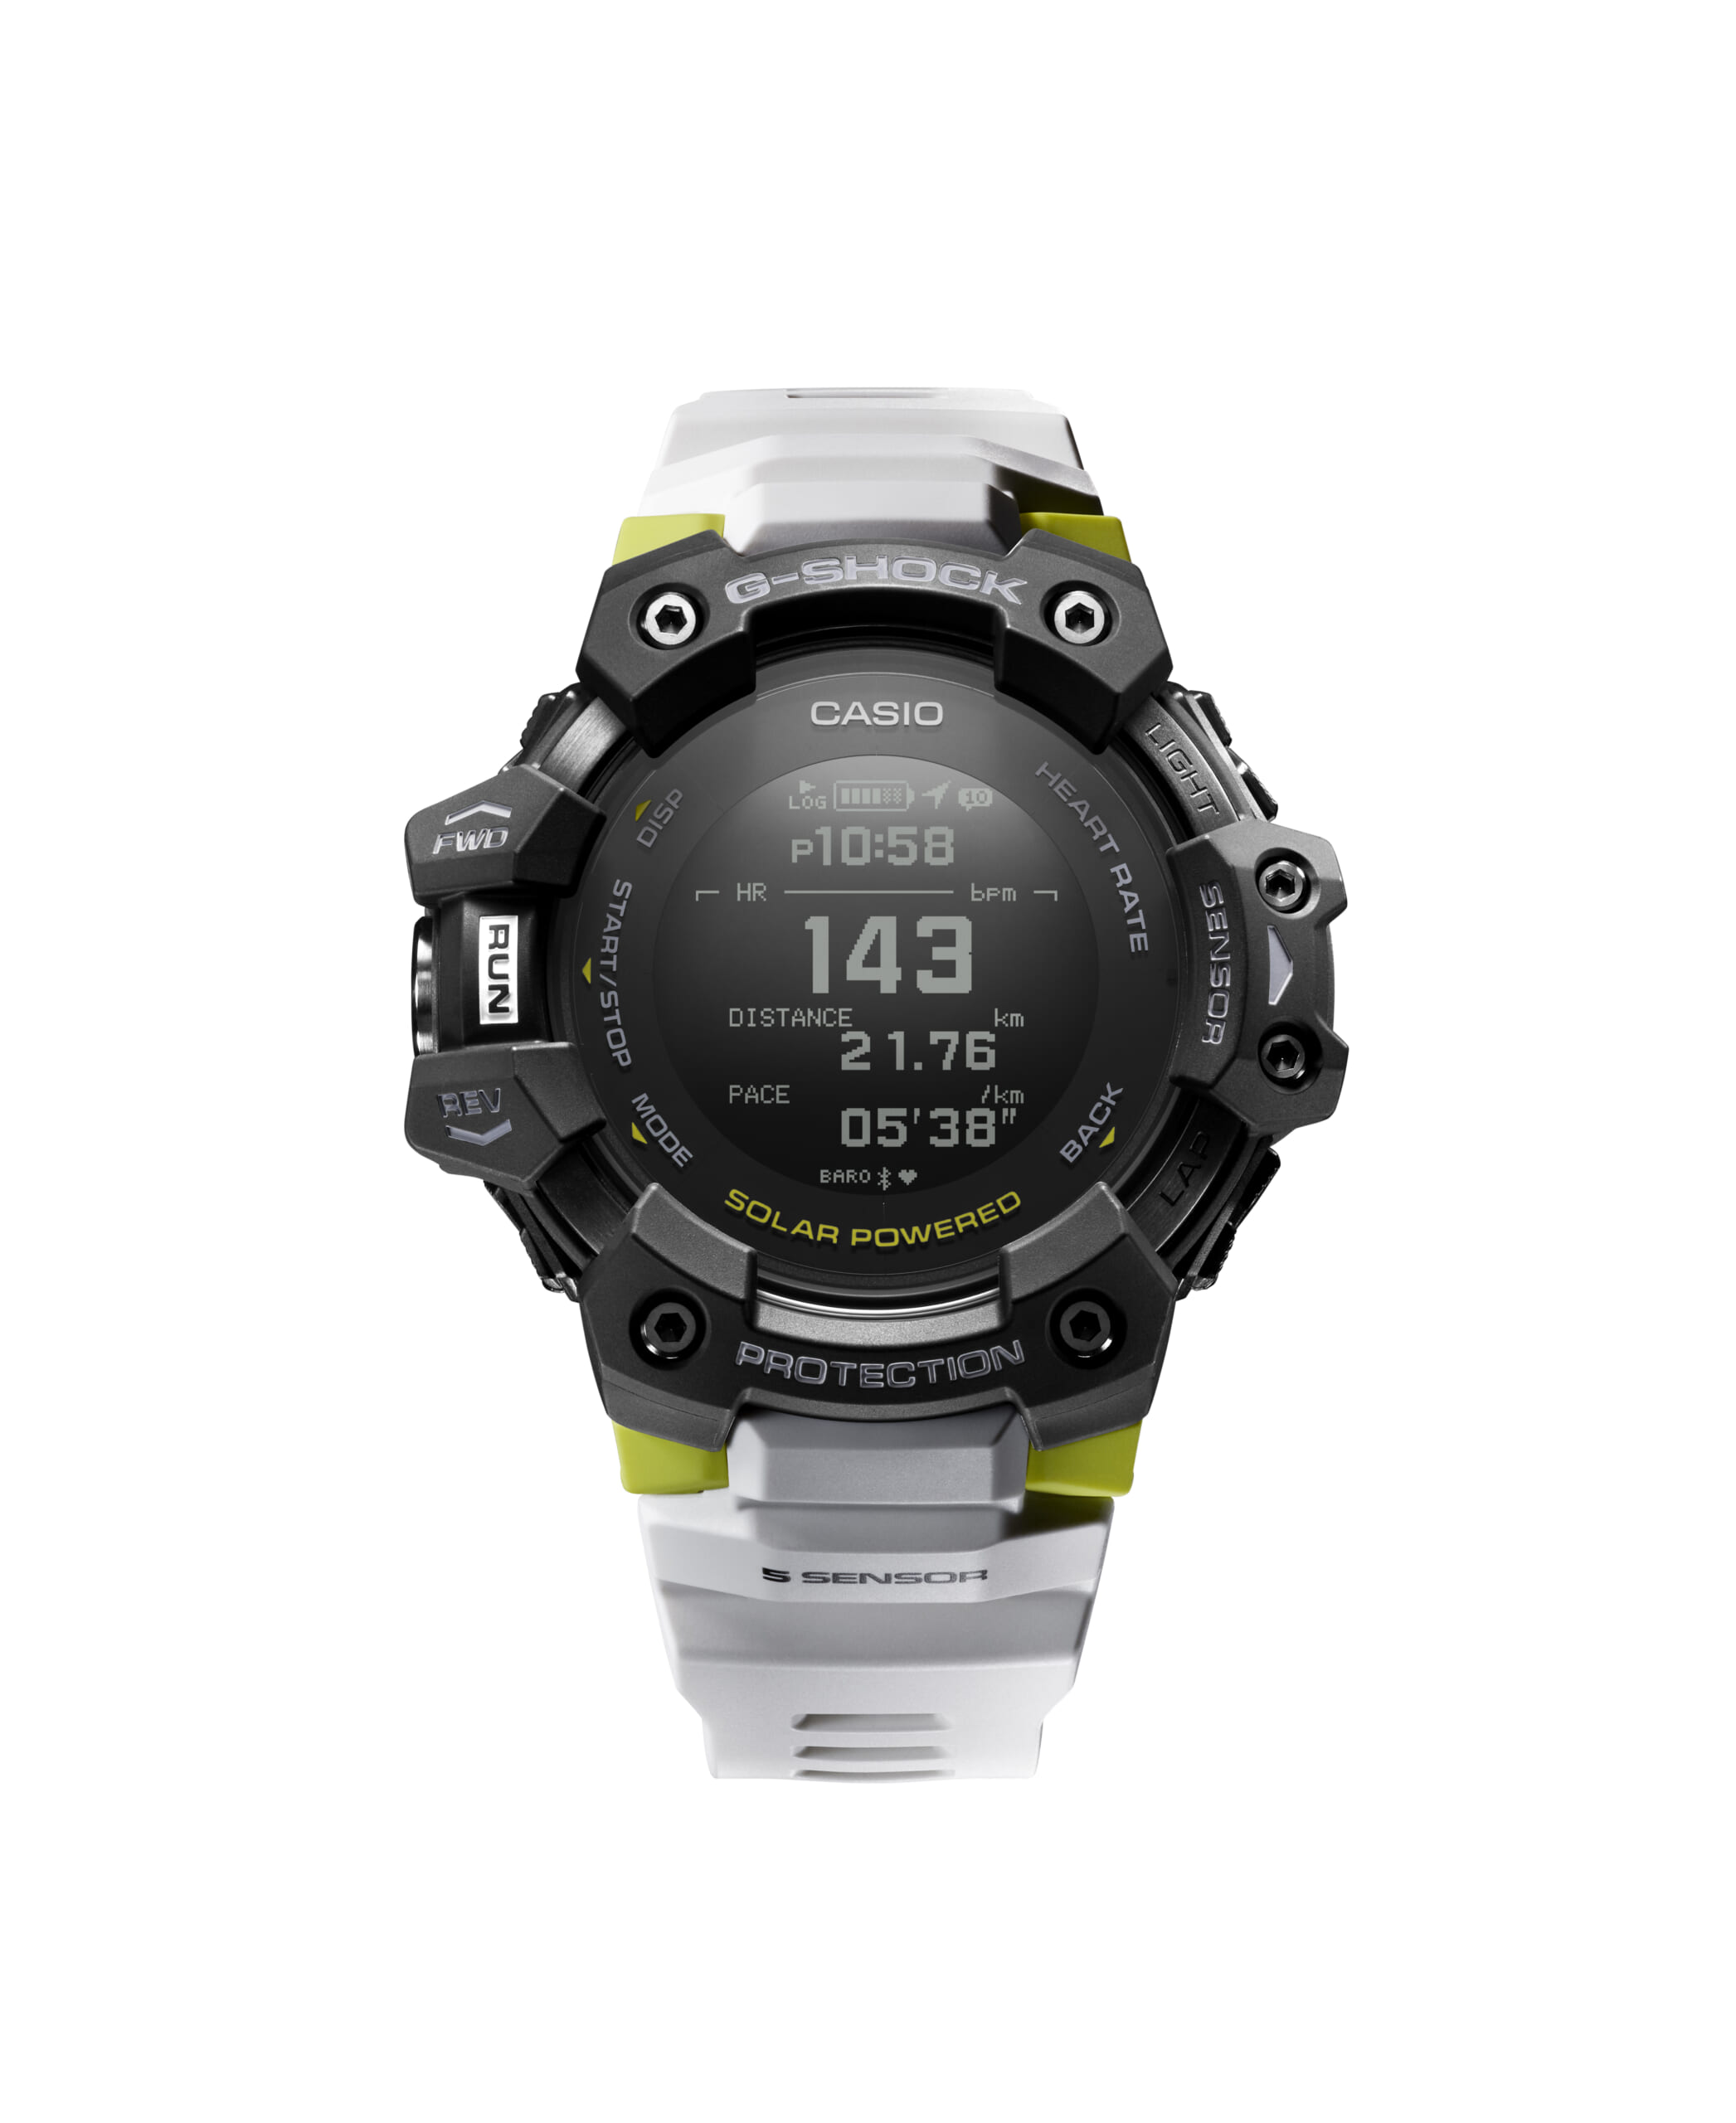 New G-Shock Move featuring the line's first heart sensor.